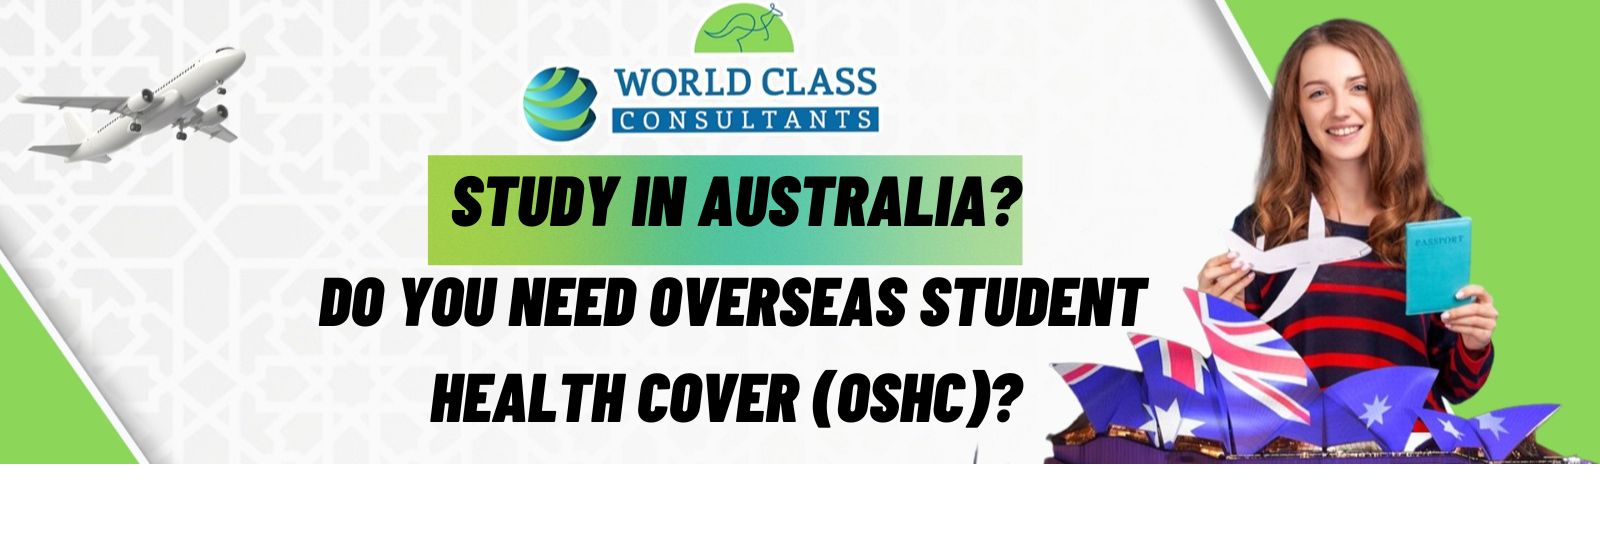 Diverse students studying together, highlighting the need for Overseas Student Health Cover (OSHC) in Australia.